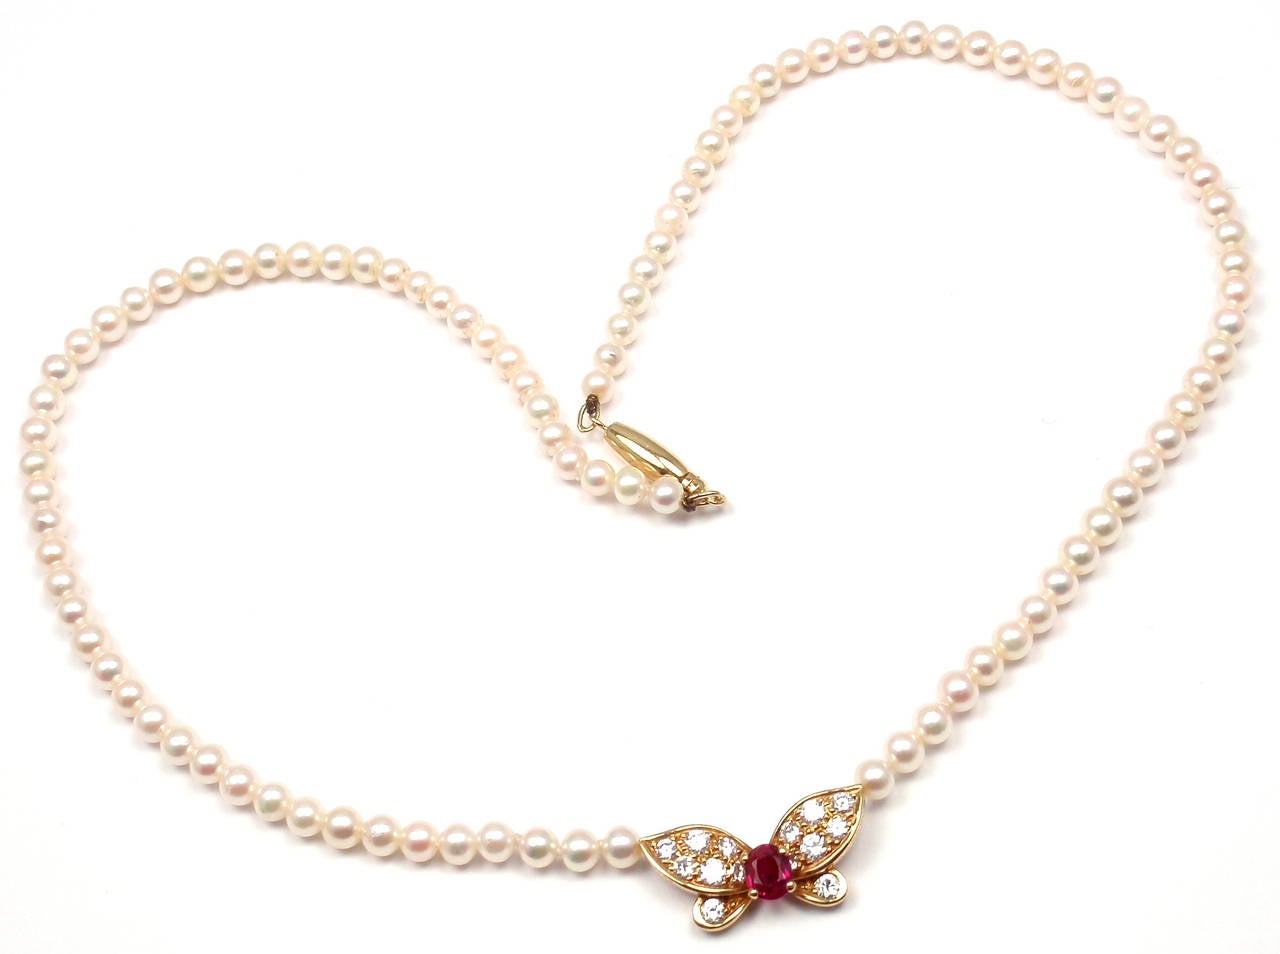 18k Yellow Gold Diamond Ruby Pearl Butterfly Necklace by Van Cleef & Arpels. With 14 round brilliant cut diamonds VS1 clarity, G color total weight .51ct
1 ruby total weight .33ct
95 cultured pearls 4mm each

Details: 
Length: 15.5''
Butterfly